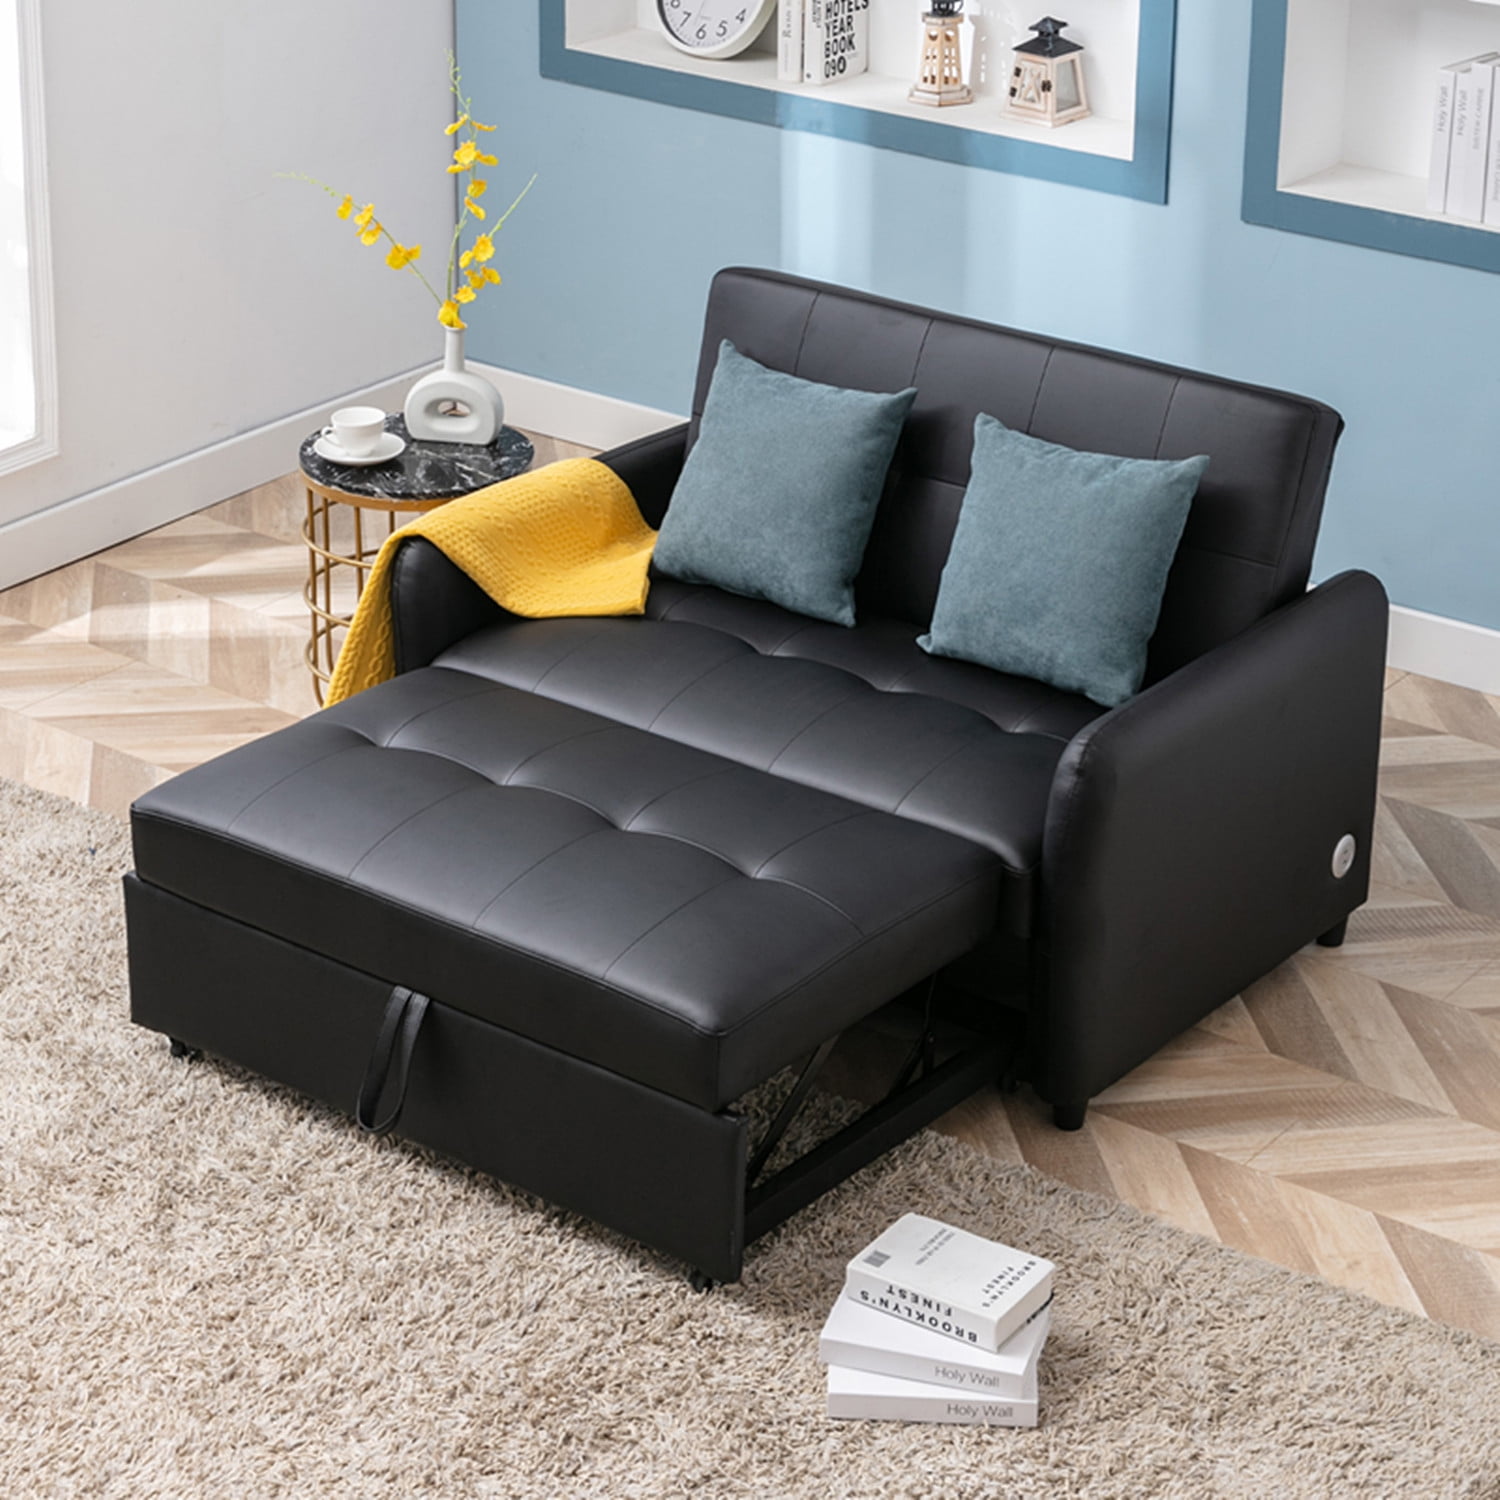 Pu Leather Sleeper Sofa With Pull Out